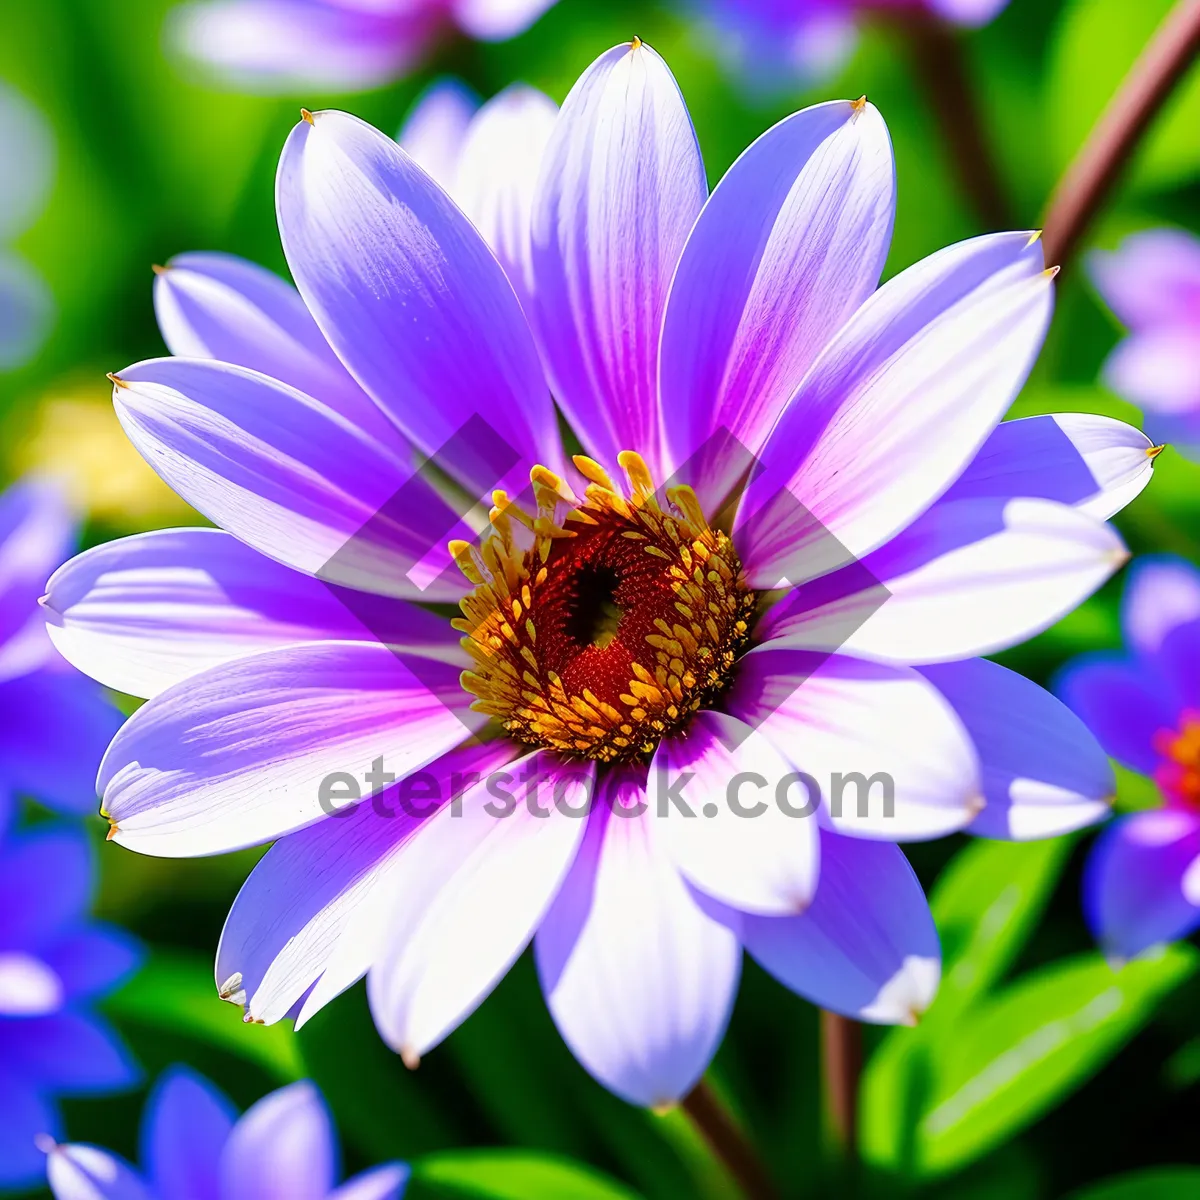 Picture of Vibrant Spring Daisy Petals in Bloom.